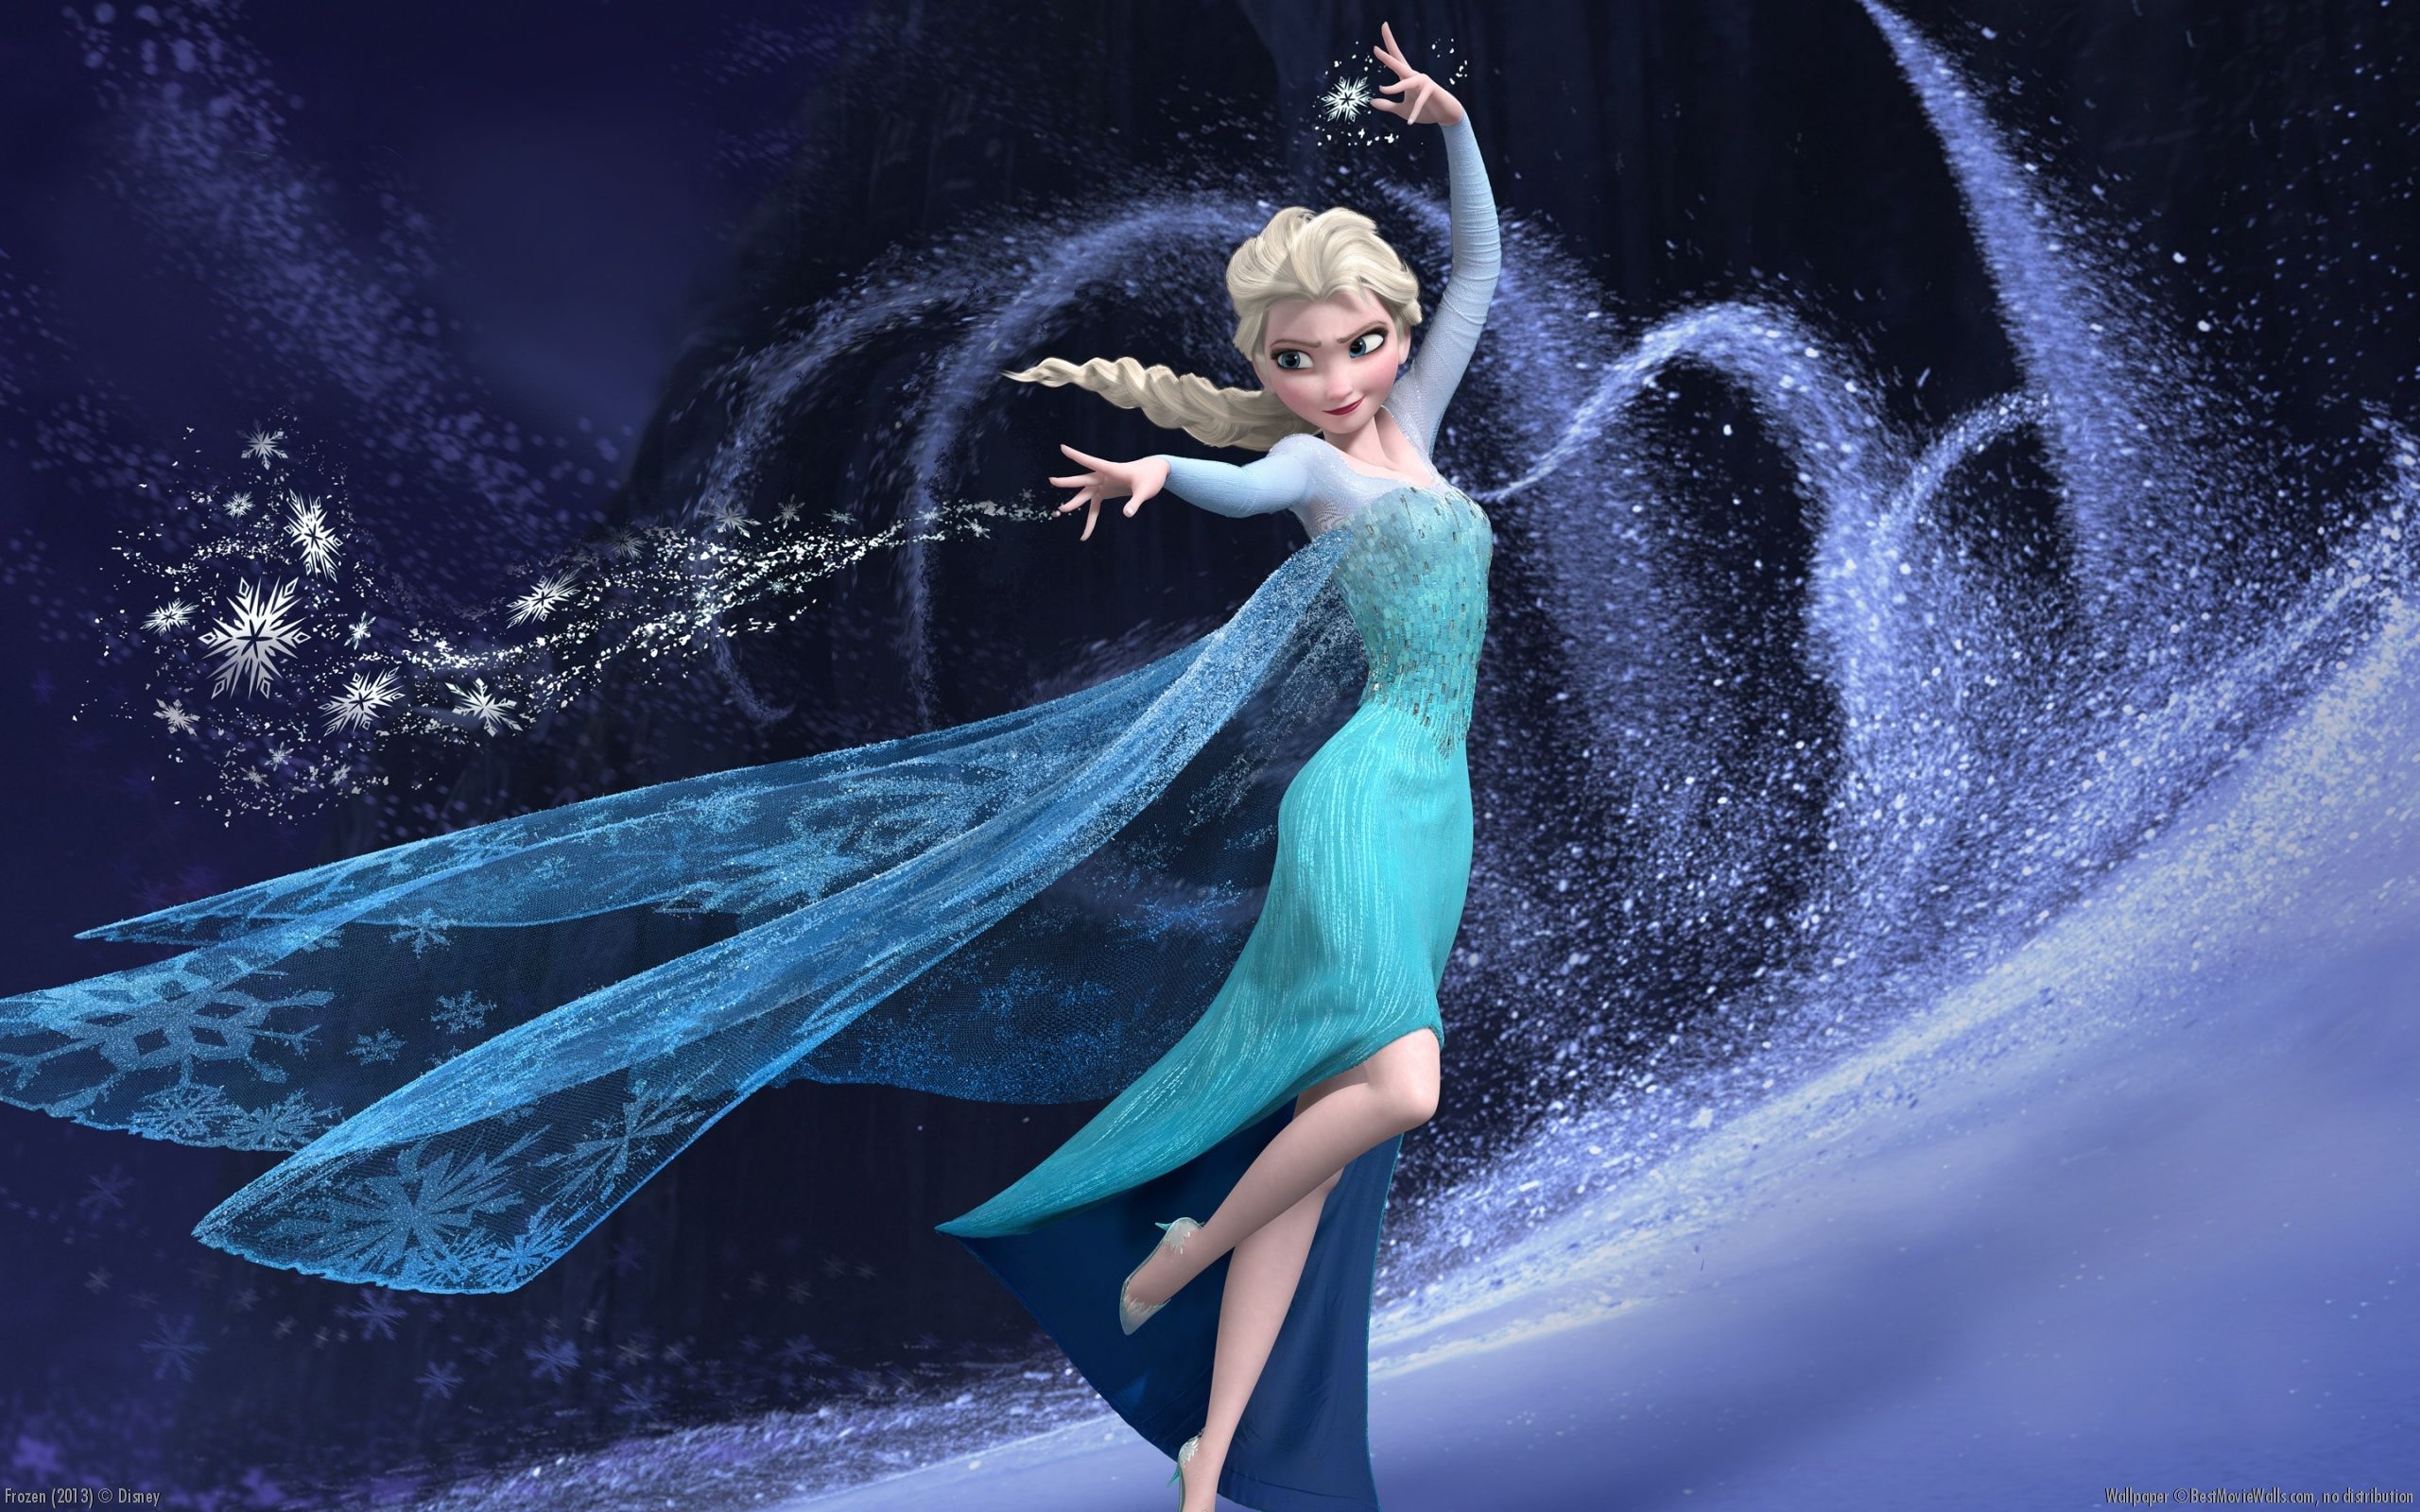 The Most Amazing & Best 'Frozen' Wallpapers On The Web